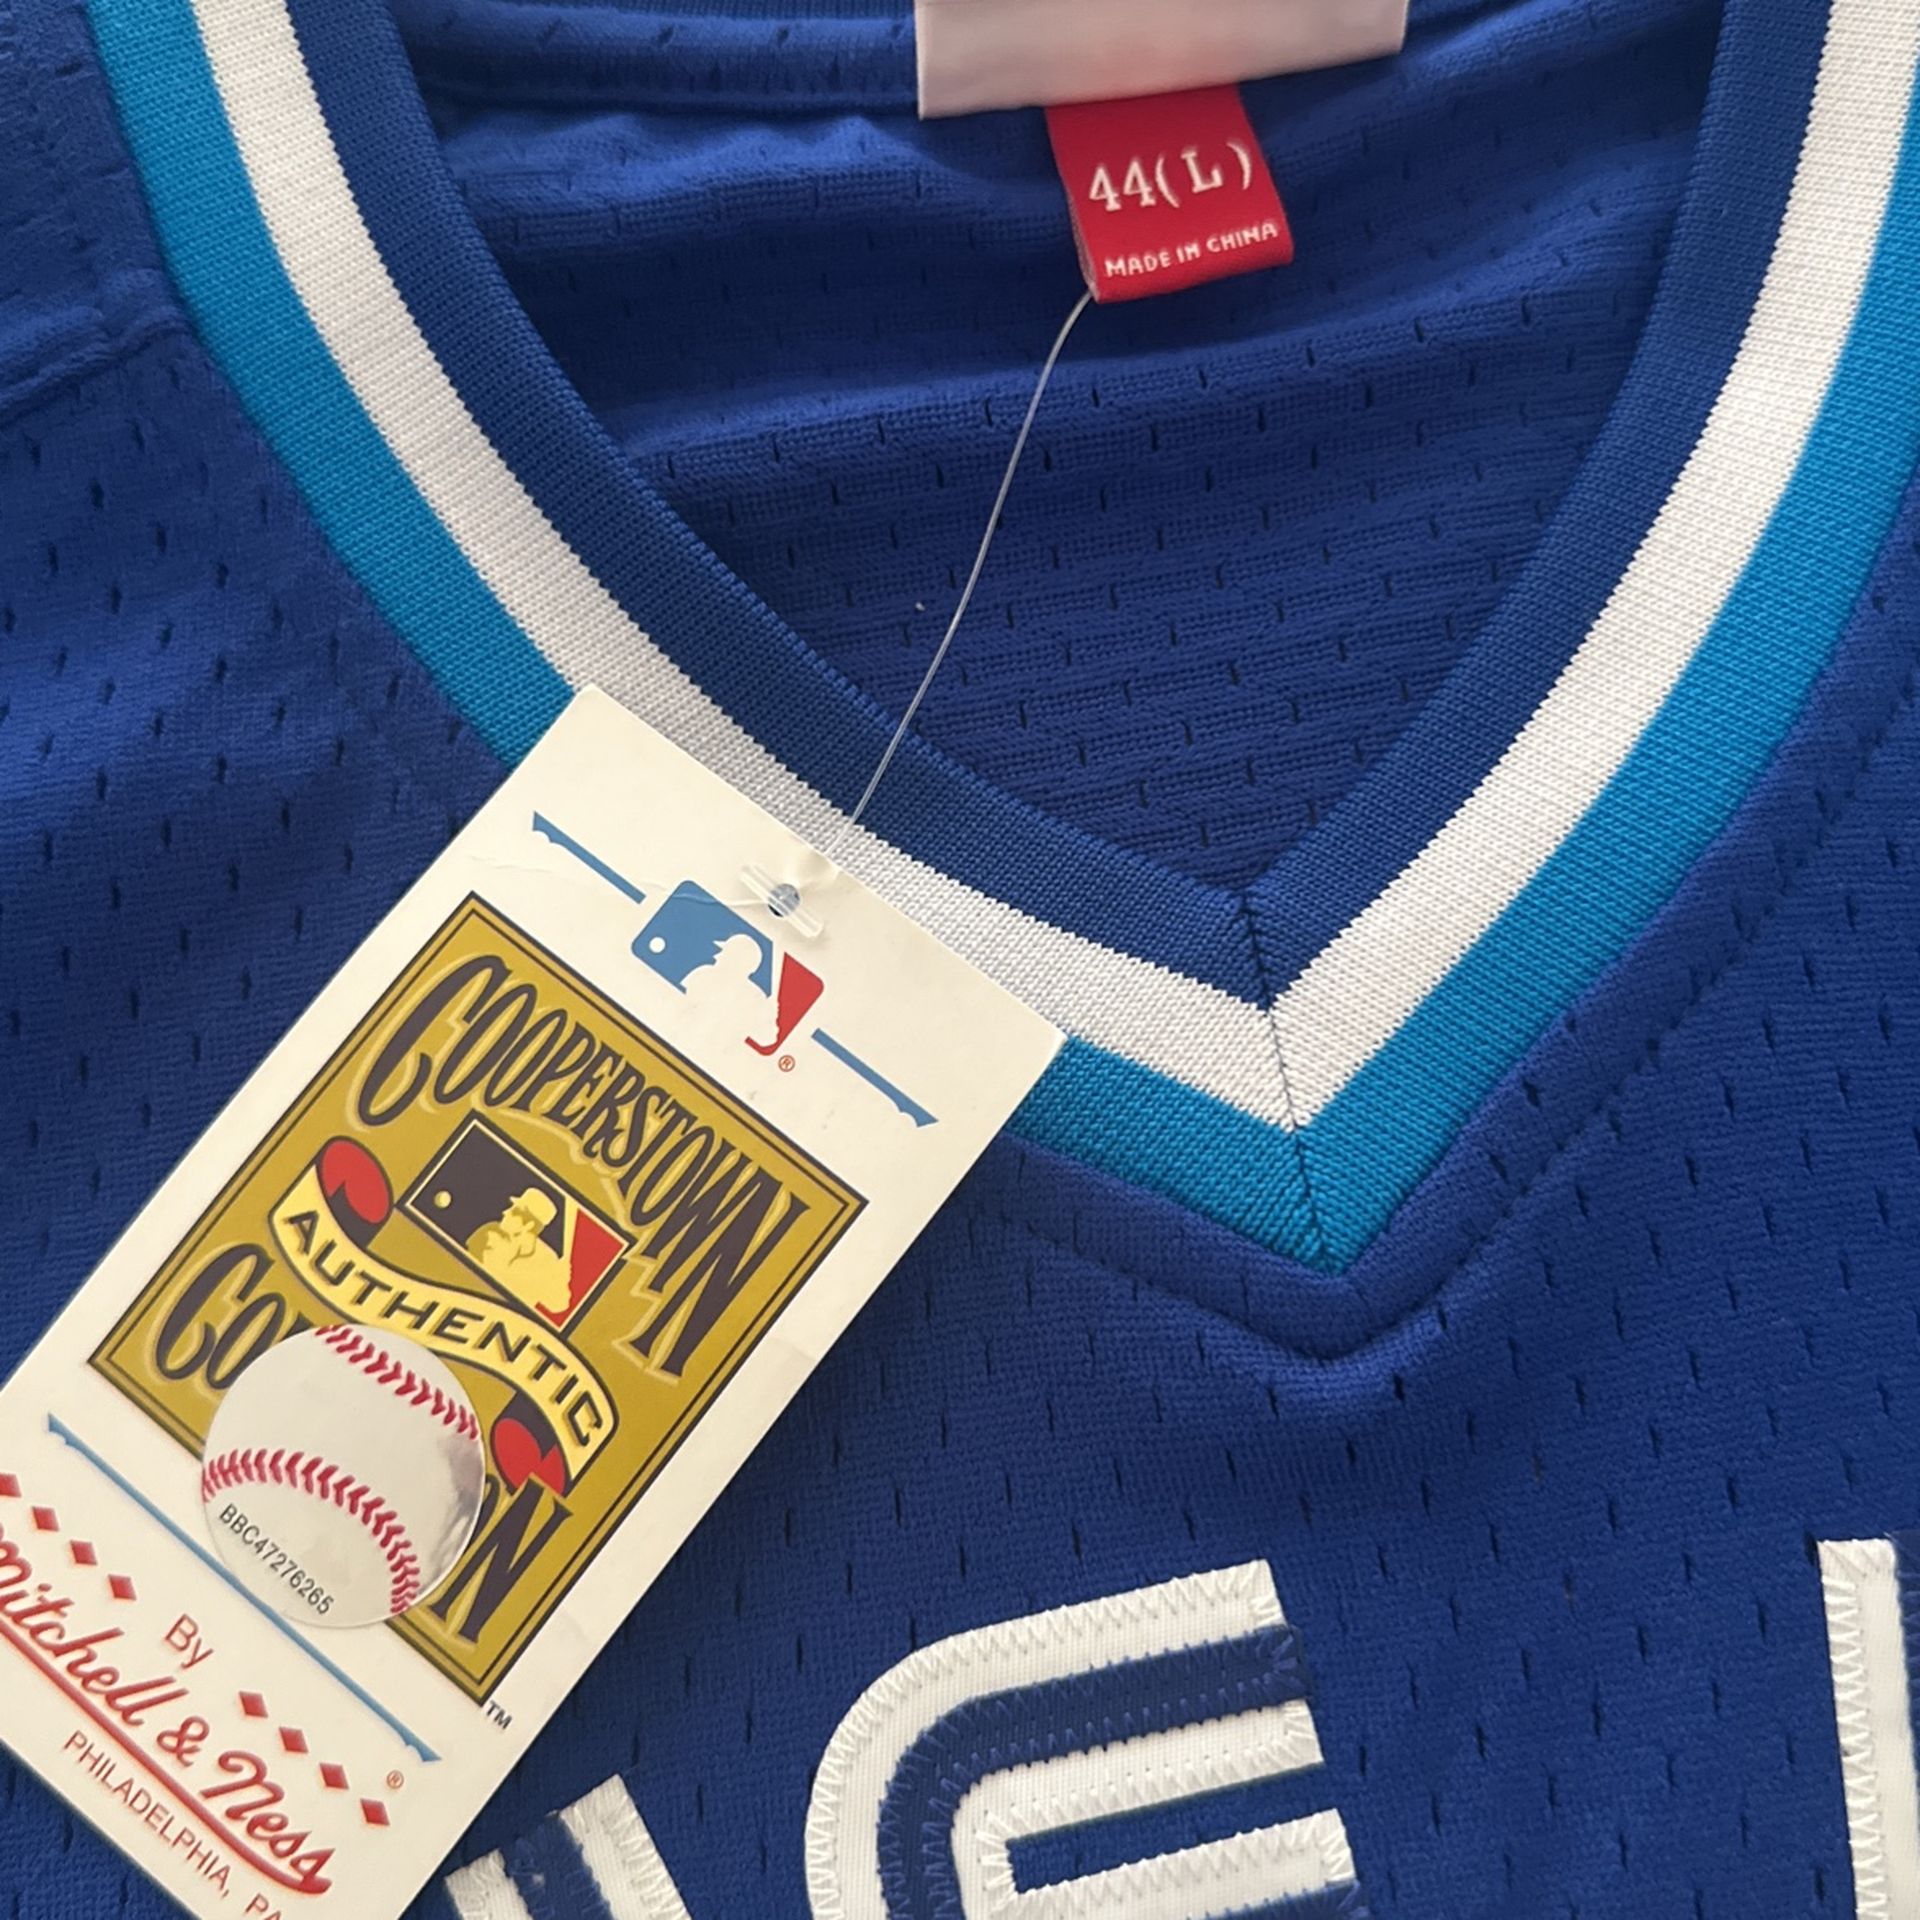 Blue Jays Baseball Jersey for Sale in Inglewood, CA - OfferUp